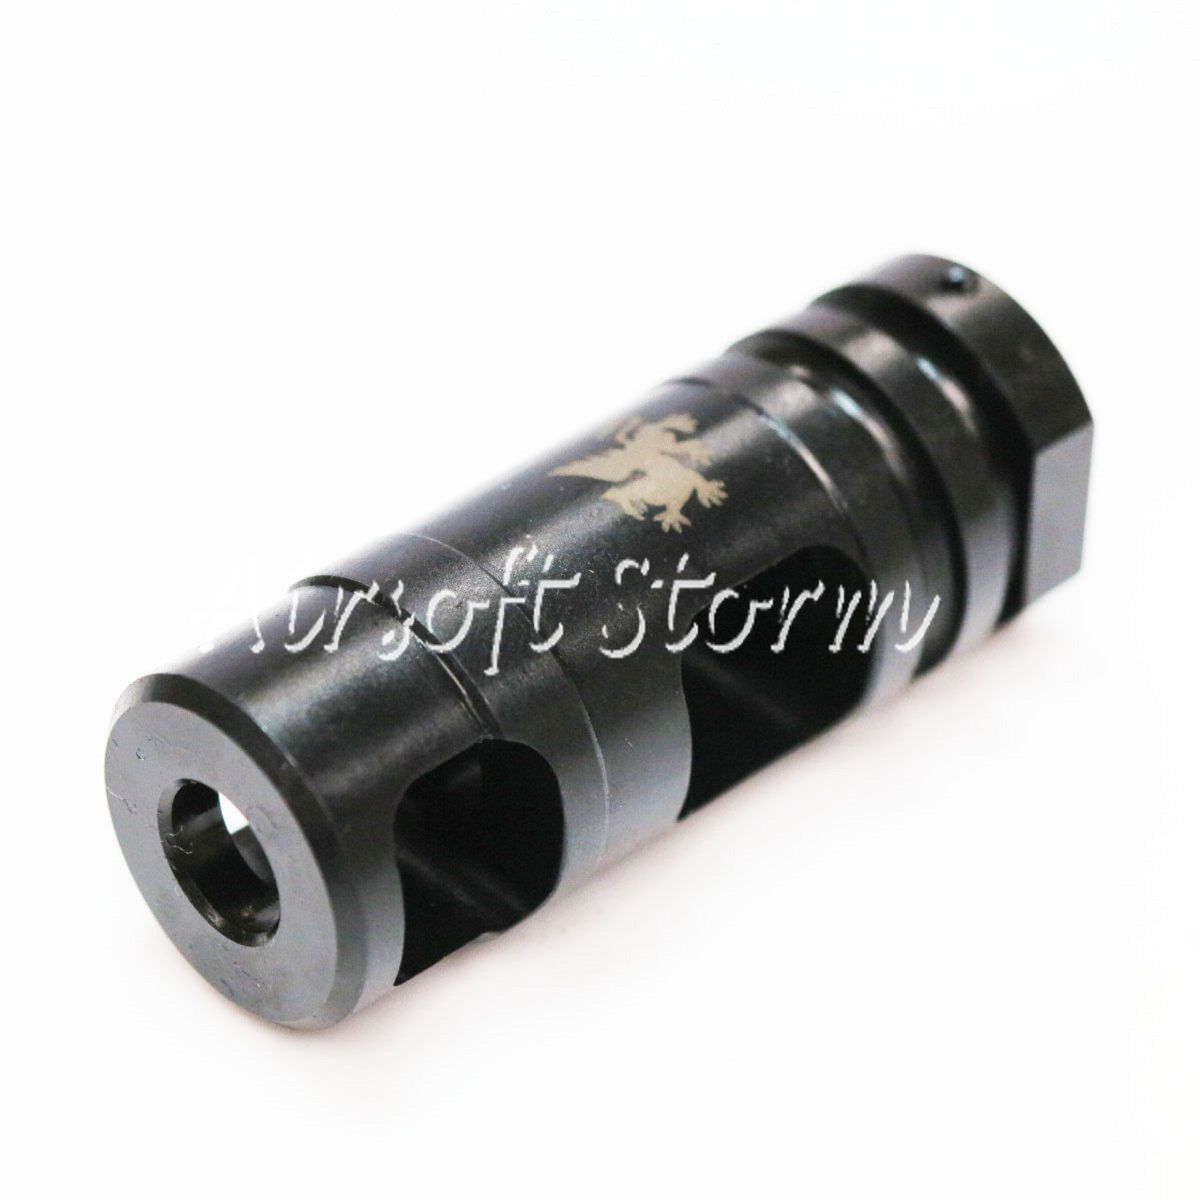 Shooting Gear PTS Griffin Armament M4SD Muzzle Brake Flash Hider 14mm CW